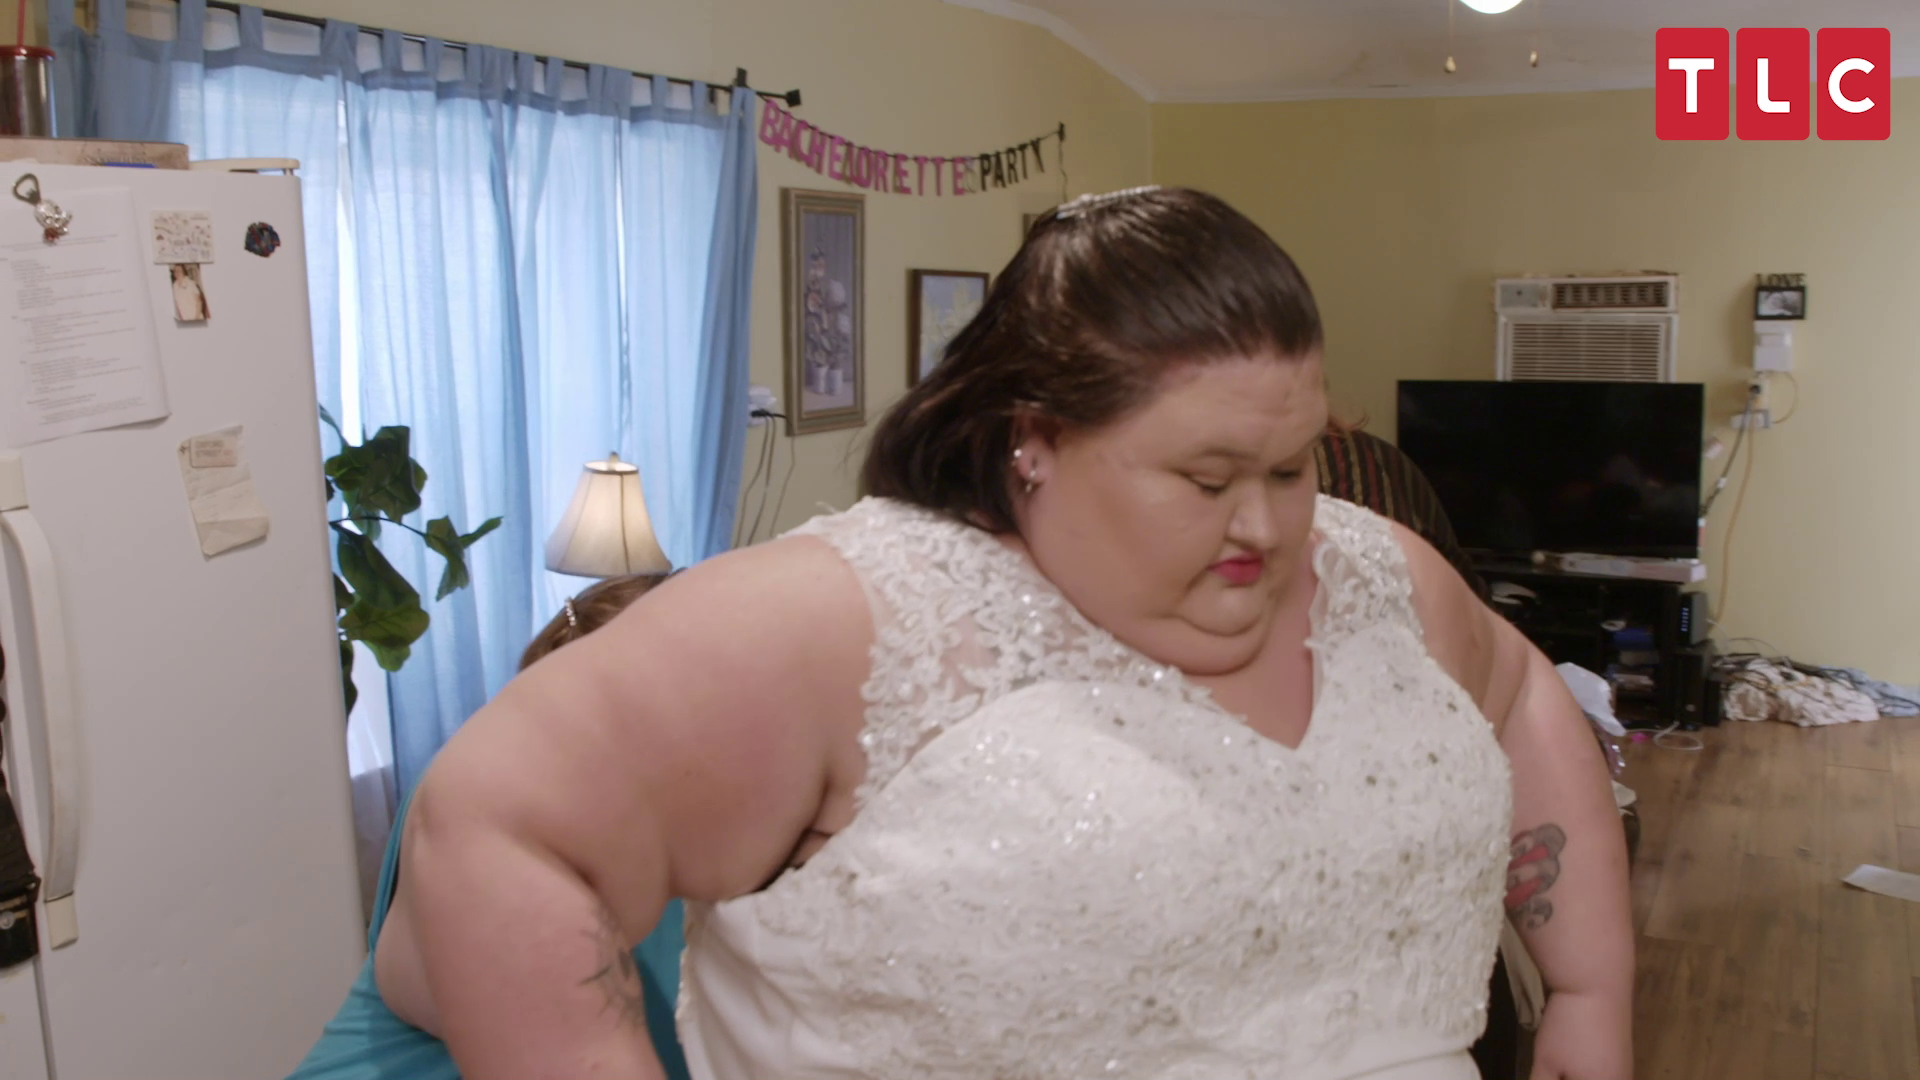 ‘1000 LB Sisters’ Star Amy Slaton Is Getting Married — See Her In The Wedding Dress!